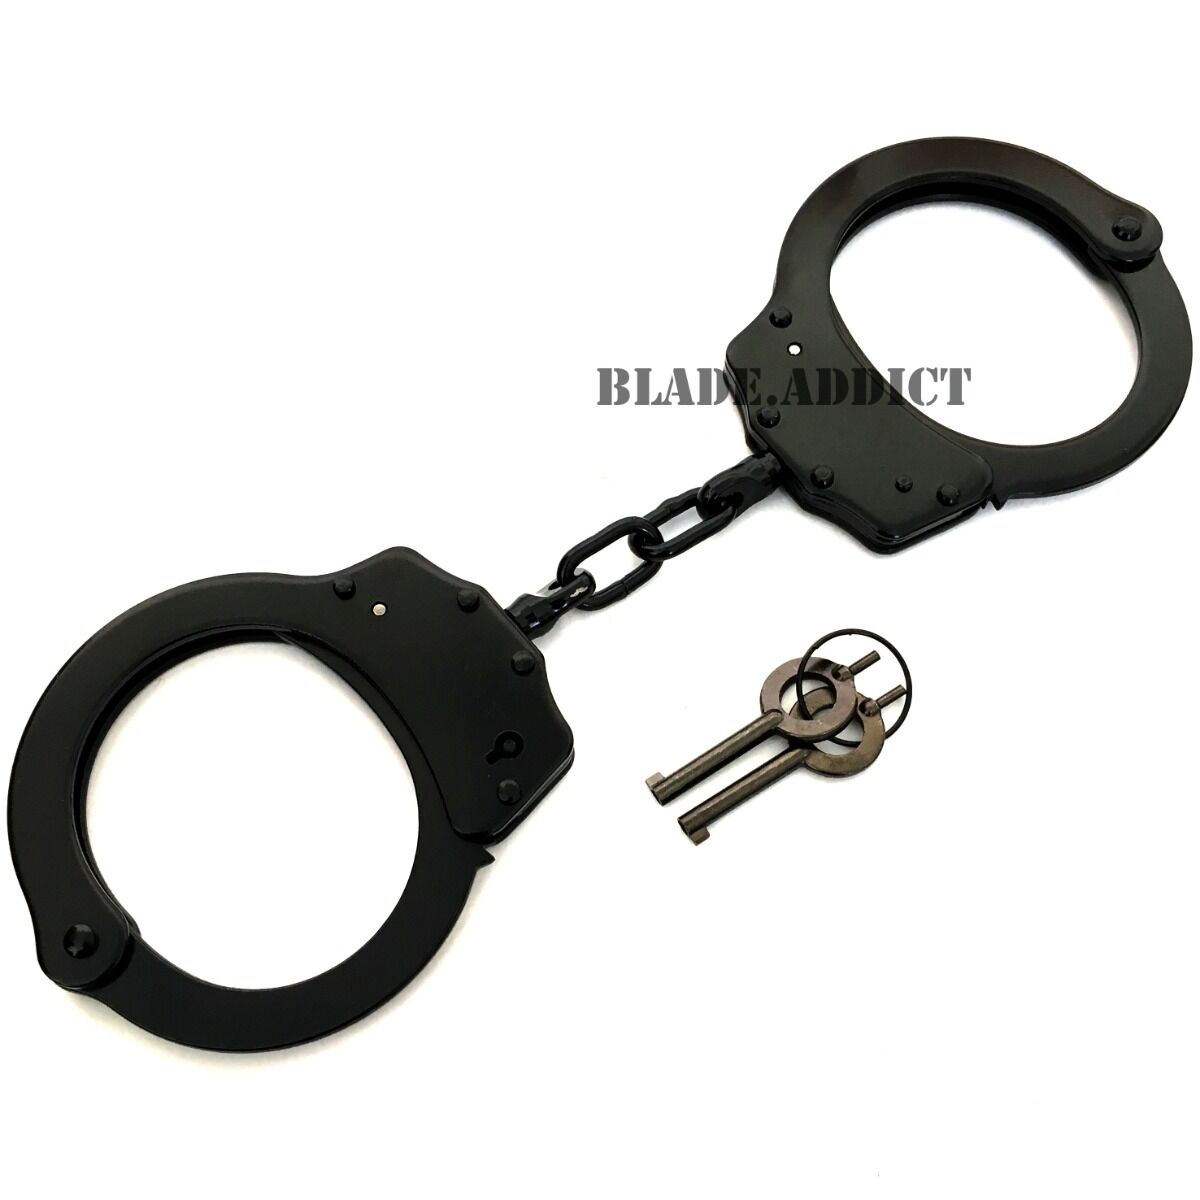 Police Handcuffs Black Steel Double Lock Real Hand Cuffs W/ Keys Authentic